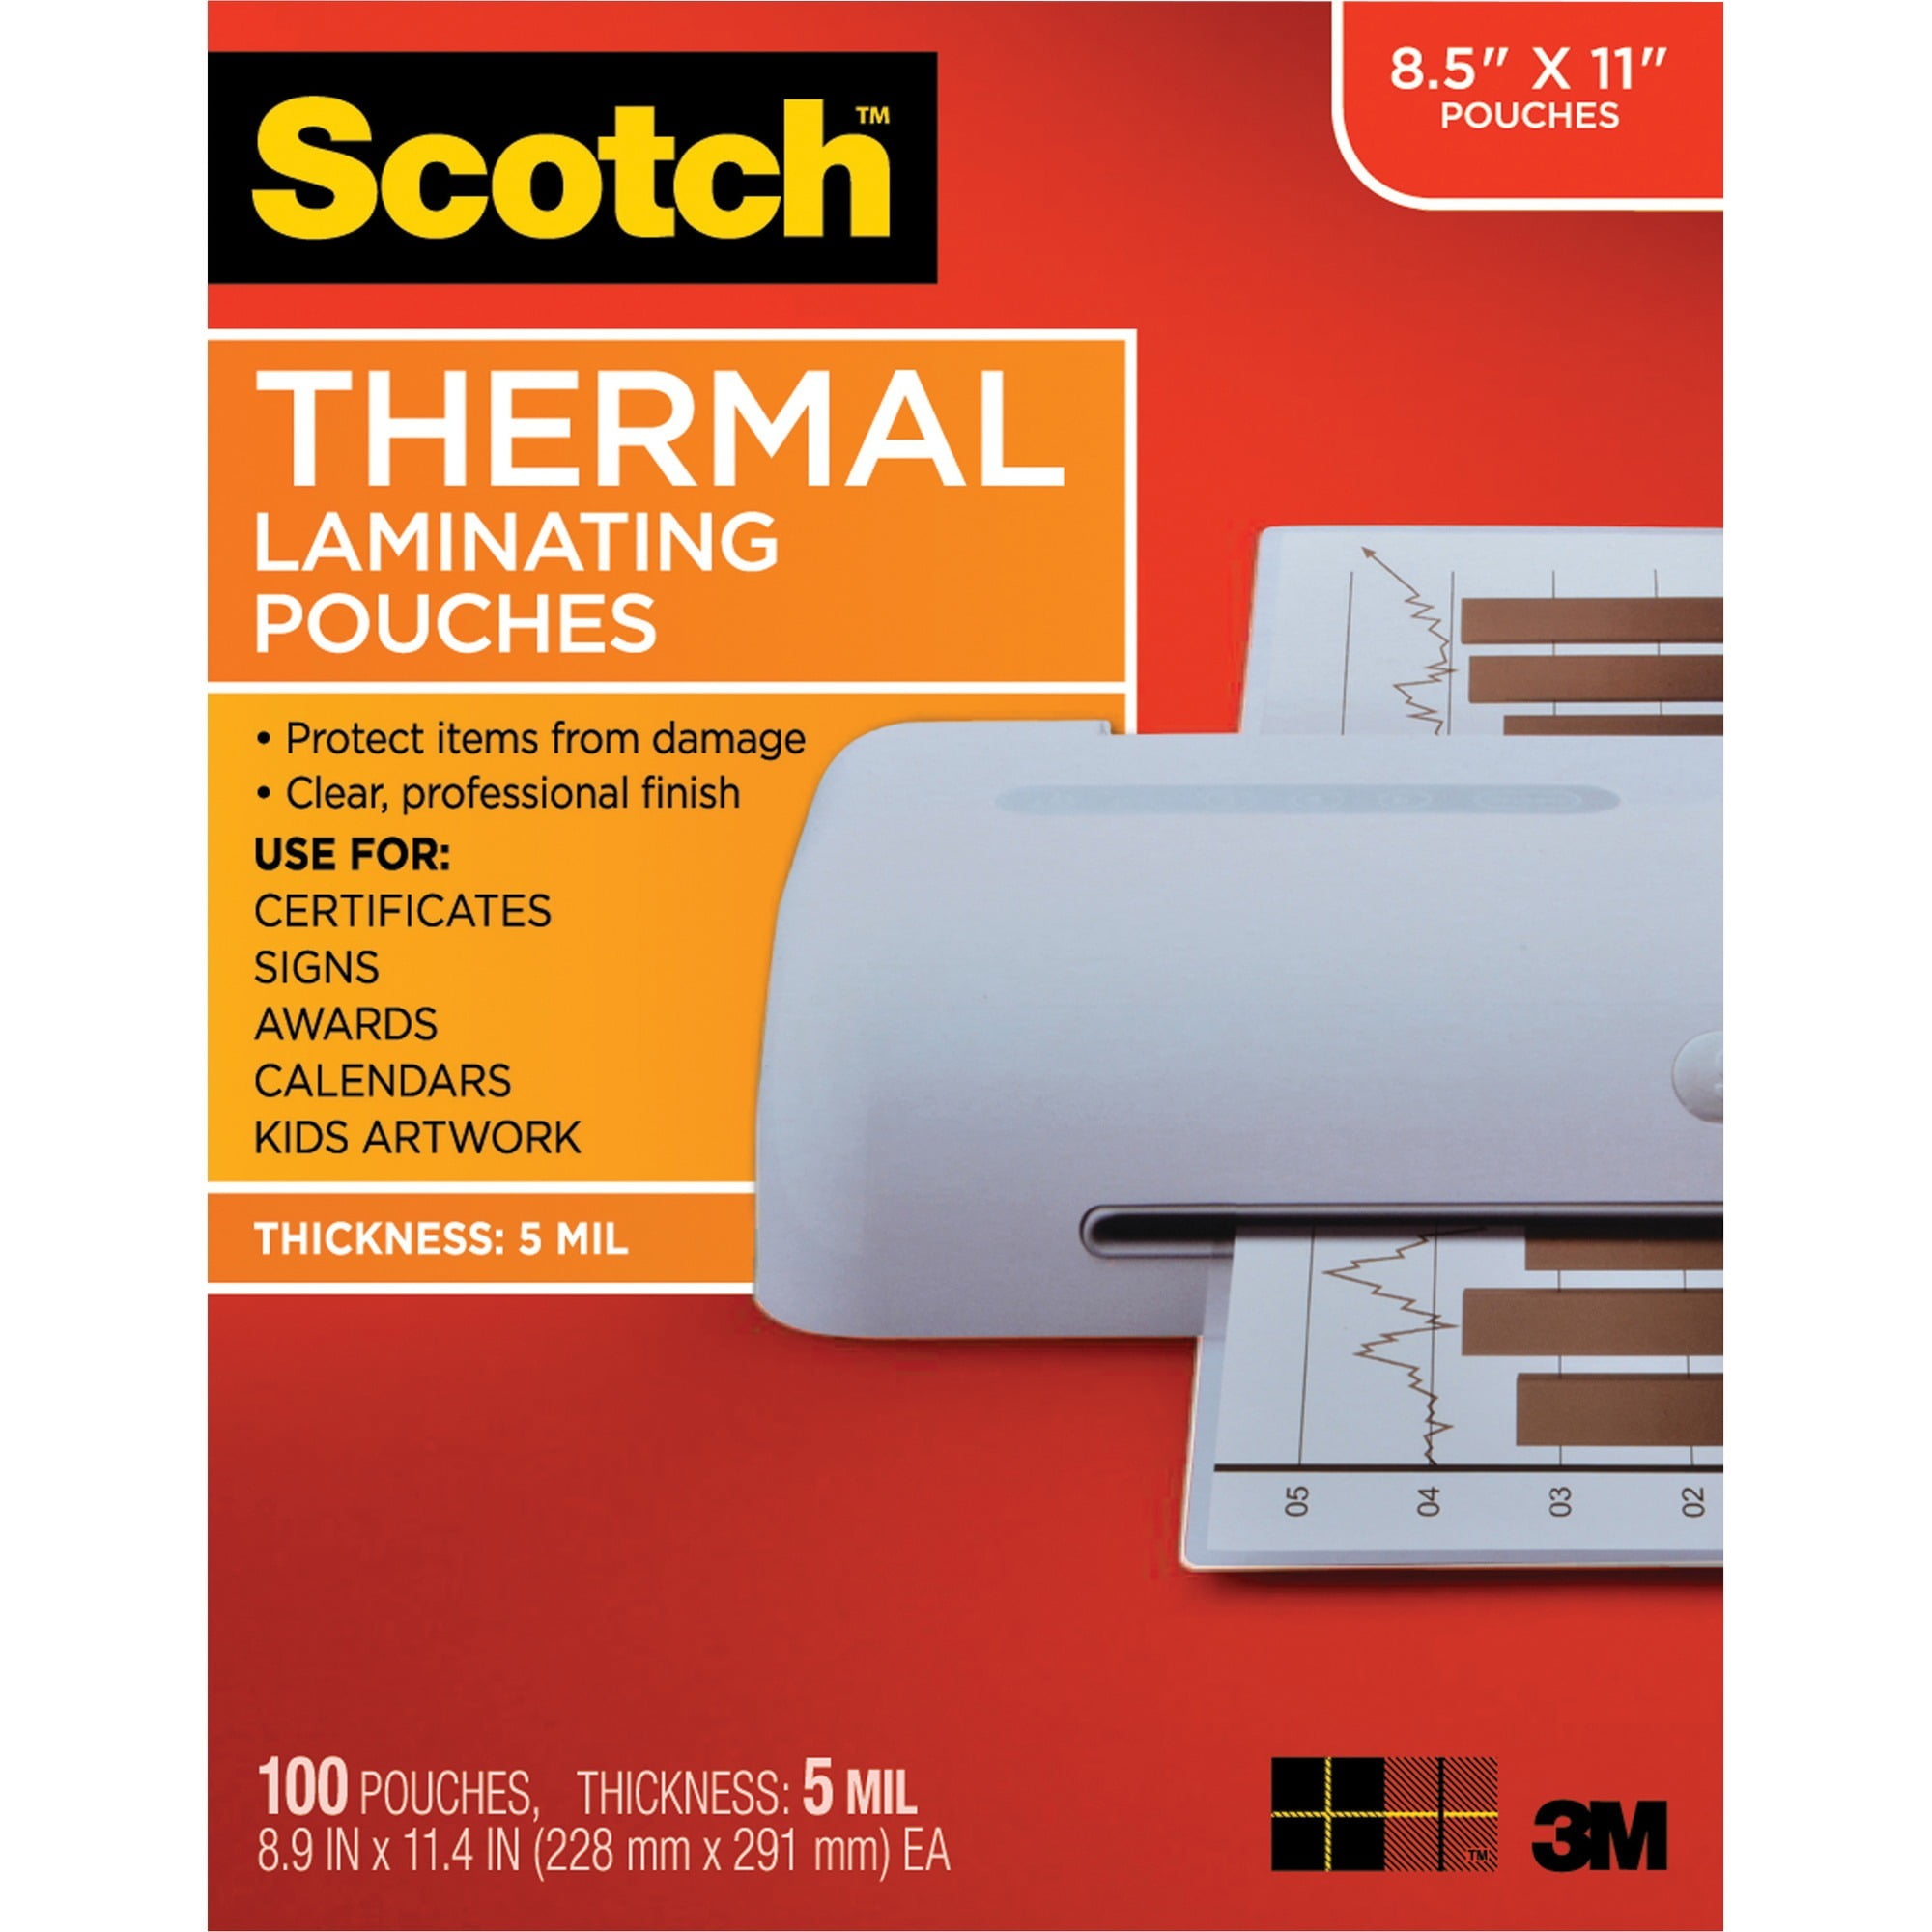 200 Letter Laminating Laminator Pouches Sheets 9 x 11-1/2 3 Mil Scotch Quality